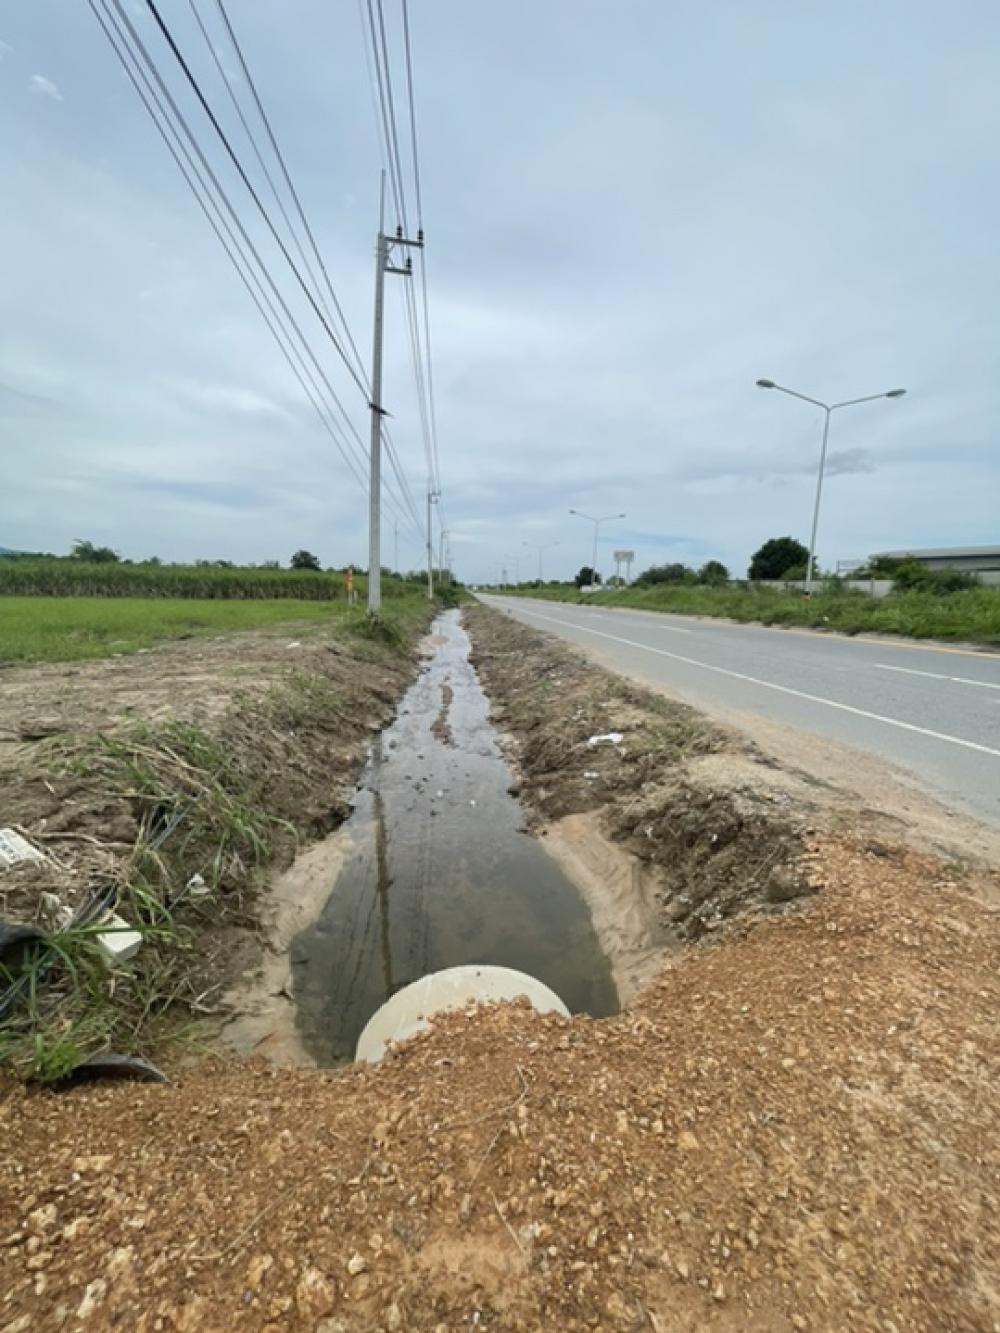 For SaleLandSriracha Laem Chabang Ban Bueng : Land for sale in Chonburi, Ban Bueng, next to the highway, 20 rai, mountain view, suitable for a factory, gas station, allocated beautiful land.